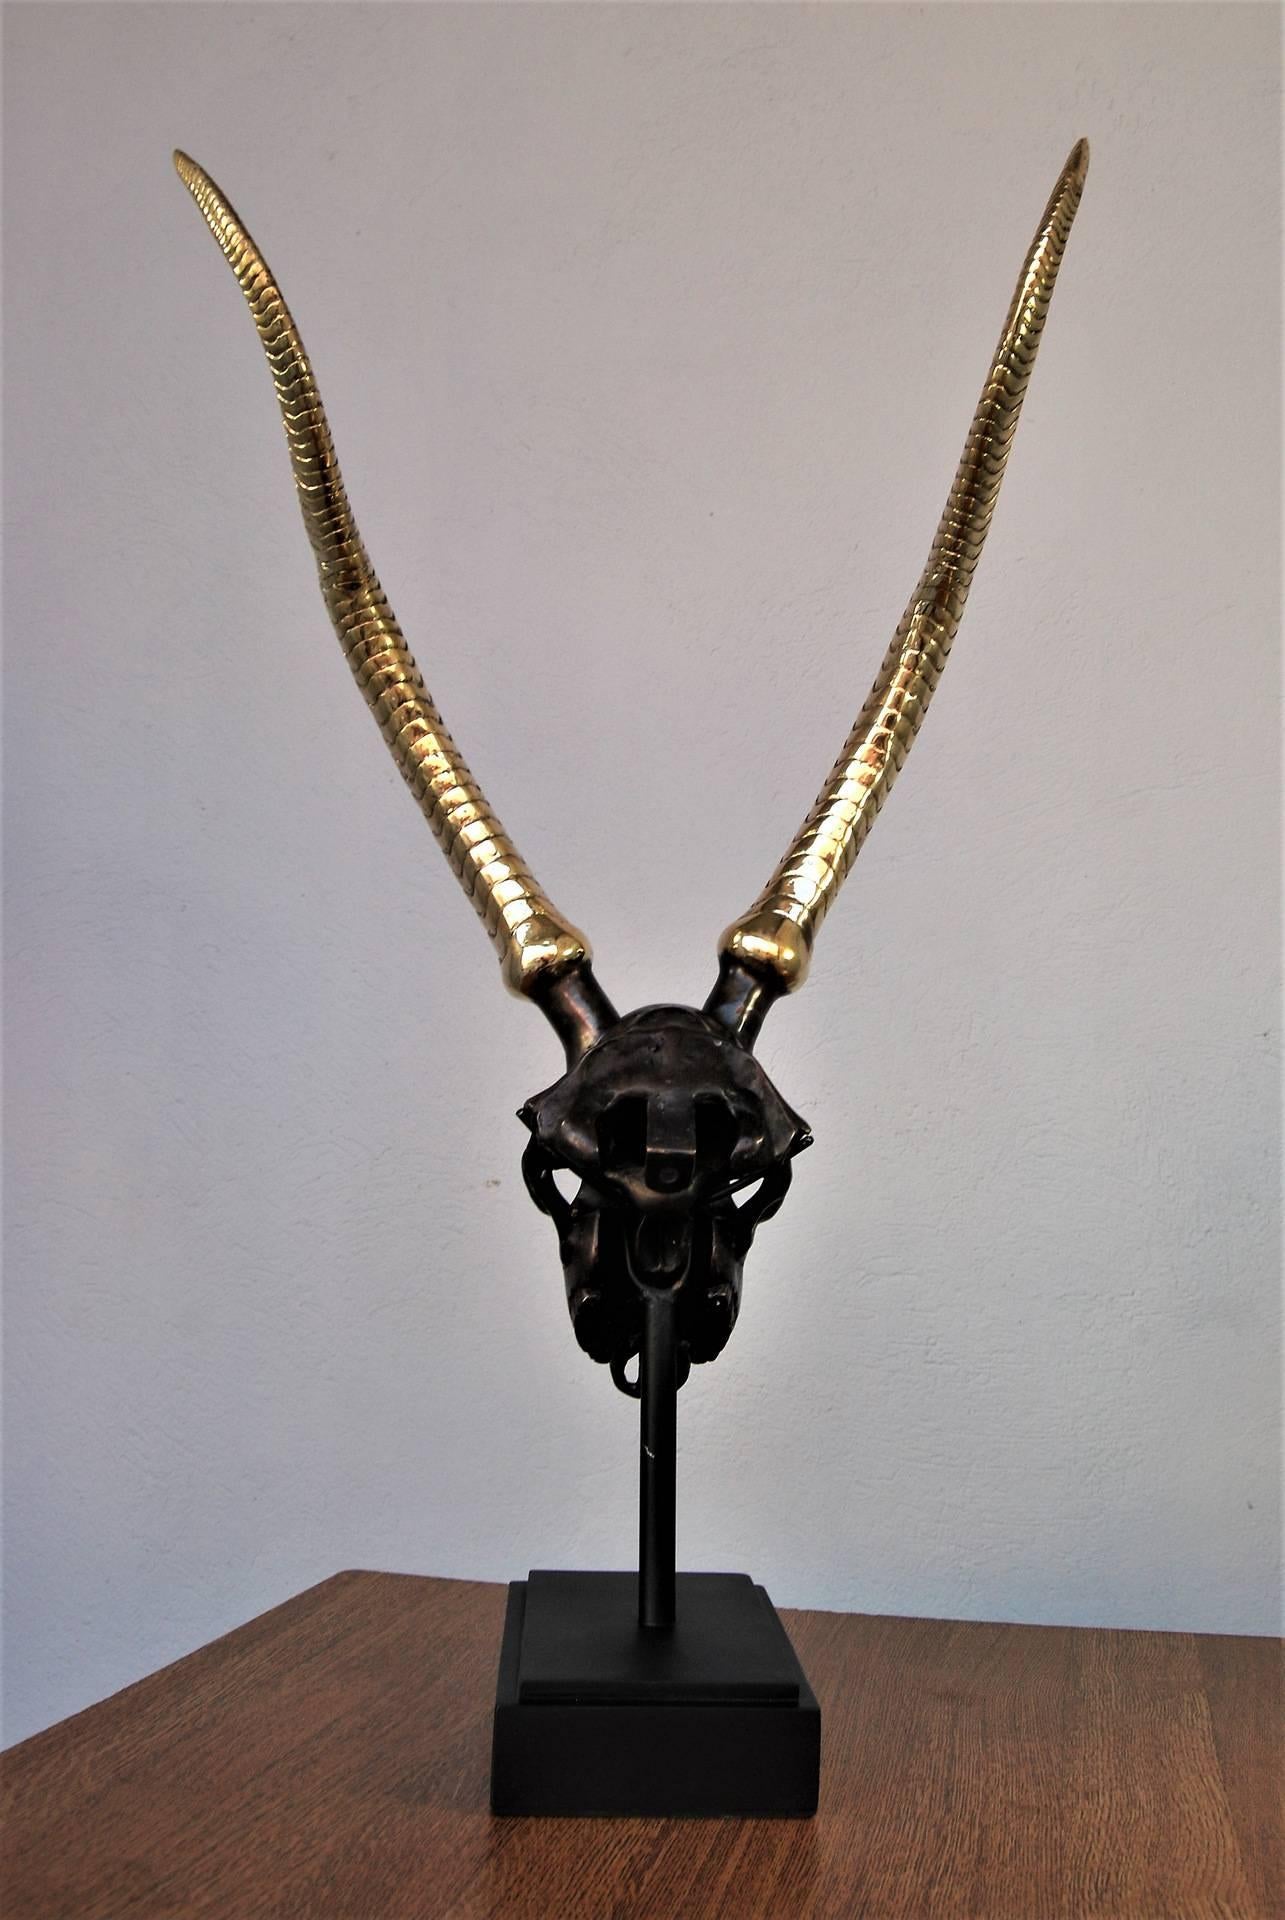 A beautiful French antelope sculpture made of patinated bronze found in Paris.